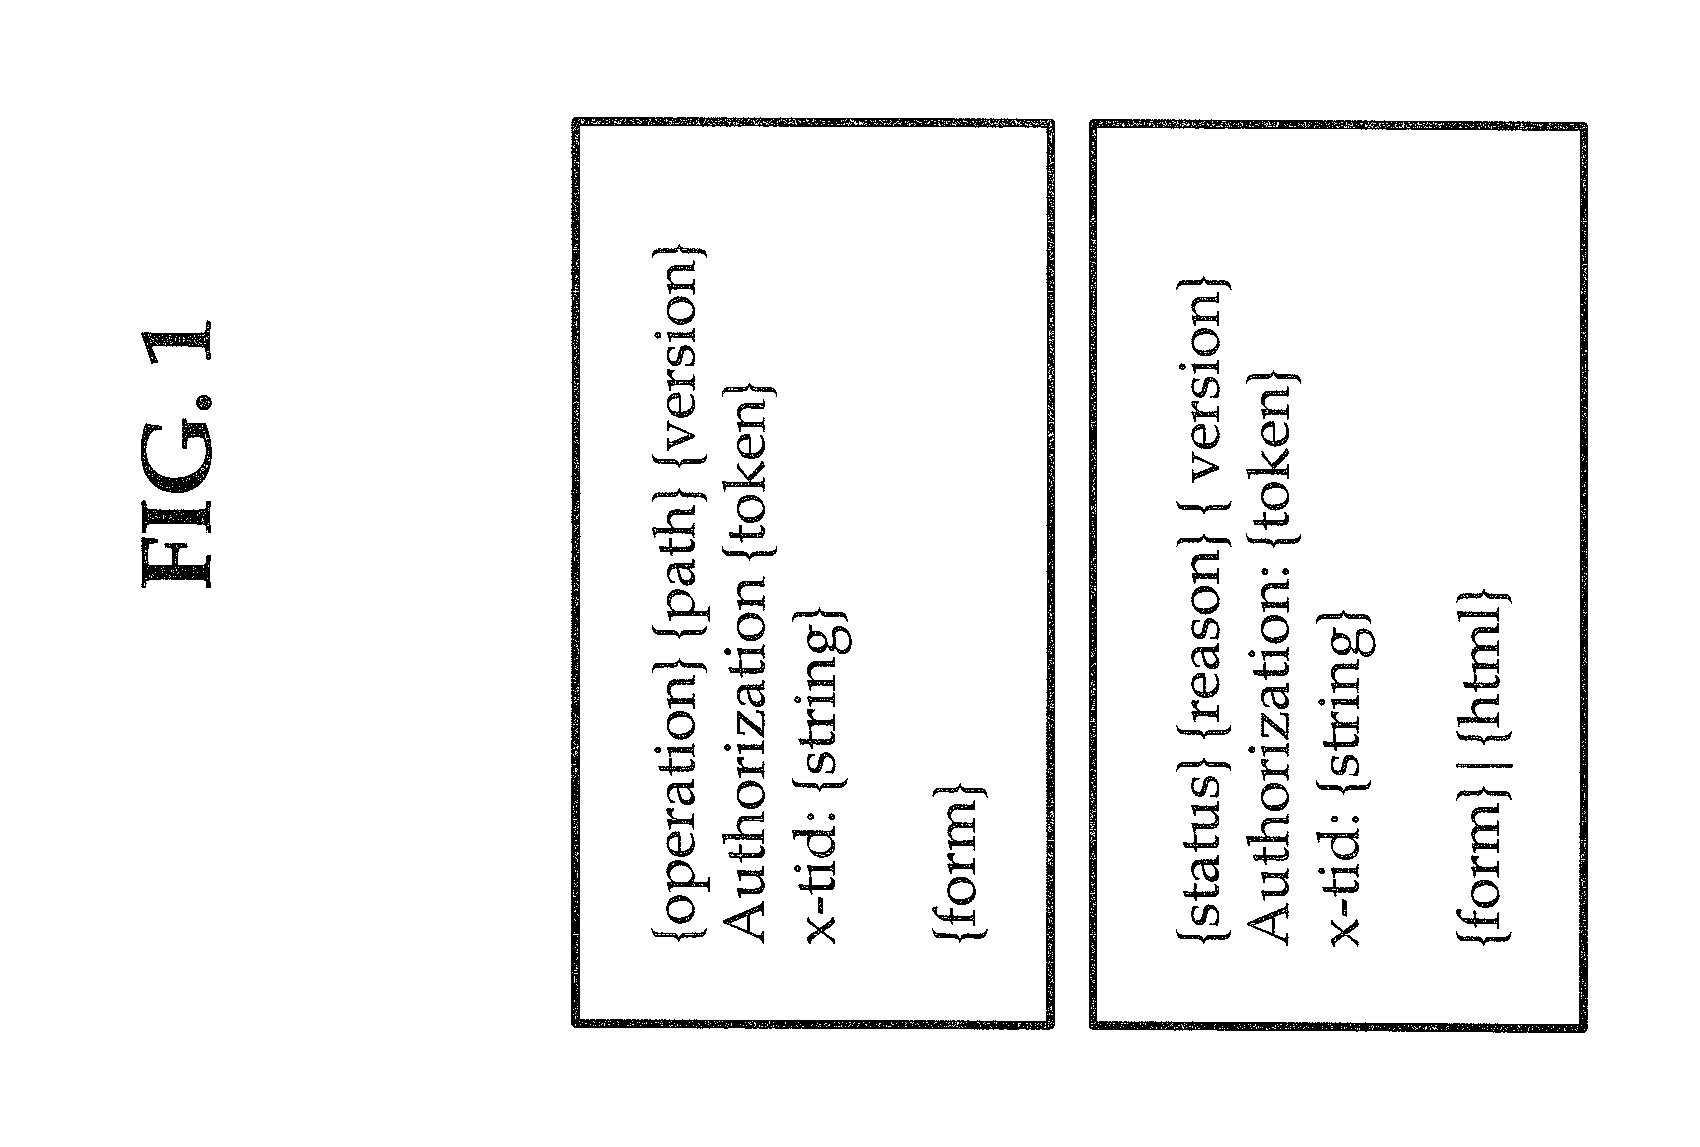 System and method to monitor and transfer hyperlink presence